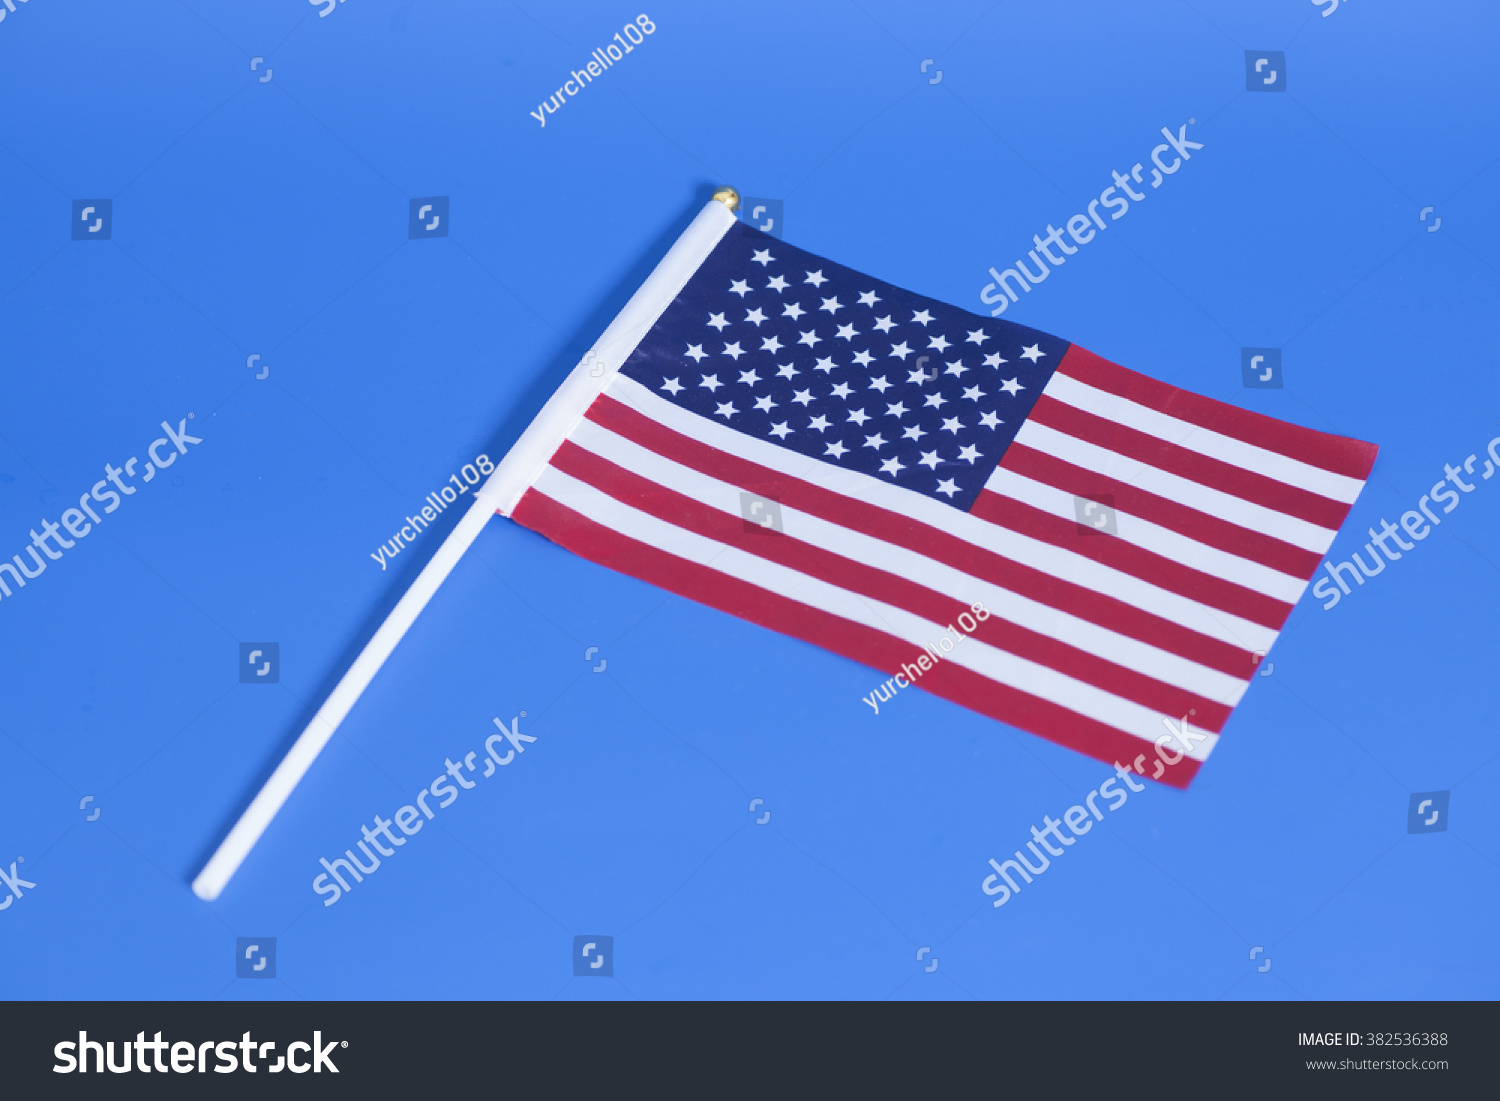 American Flag On Blue Background Stock Photo 382536388 : Shutterstock